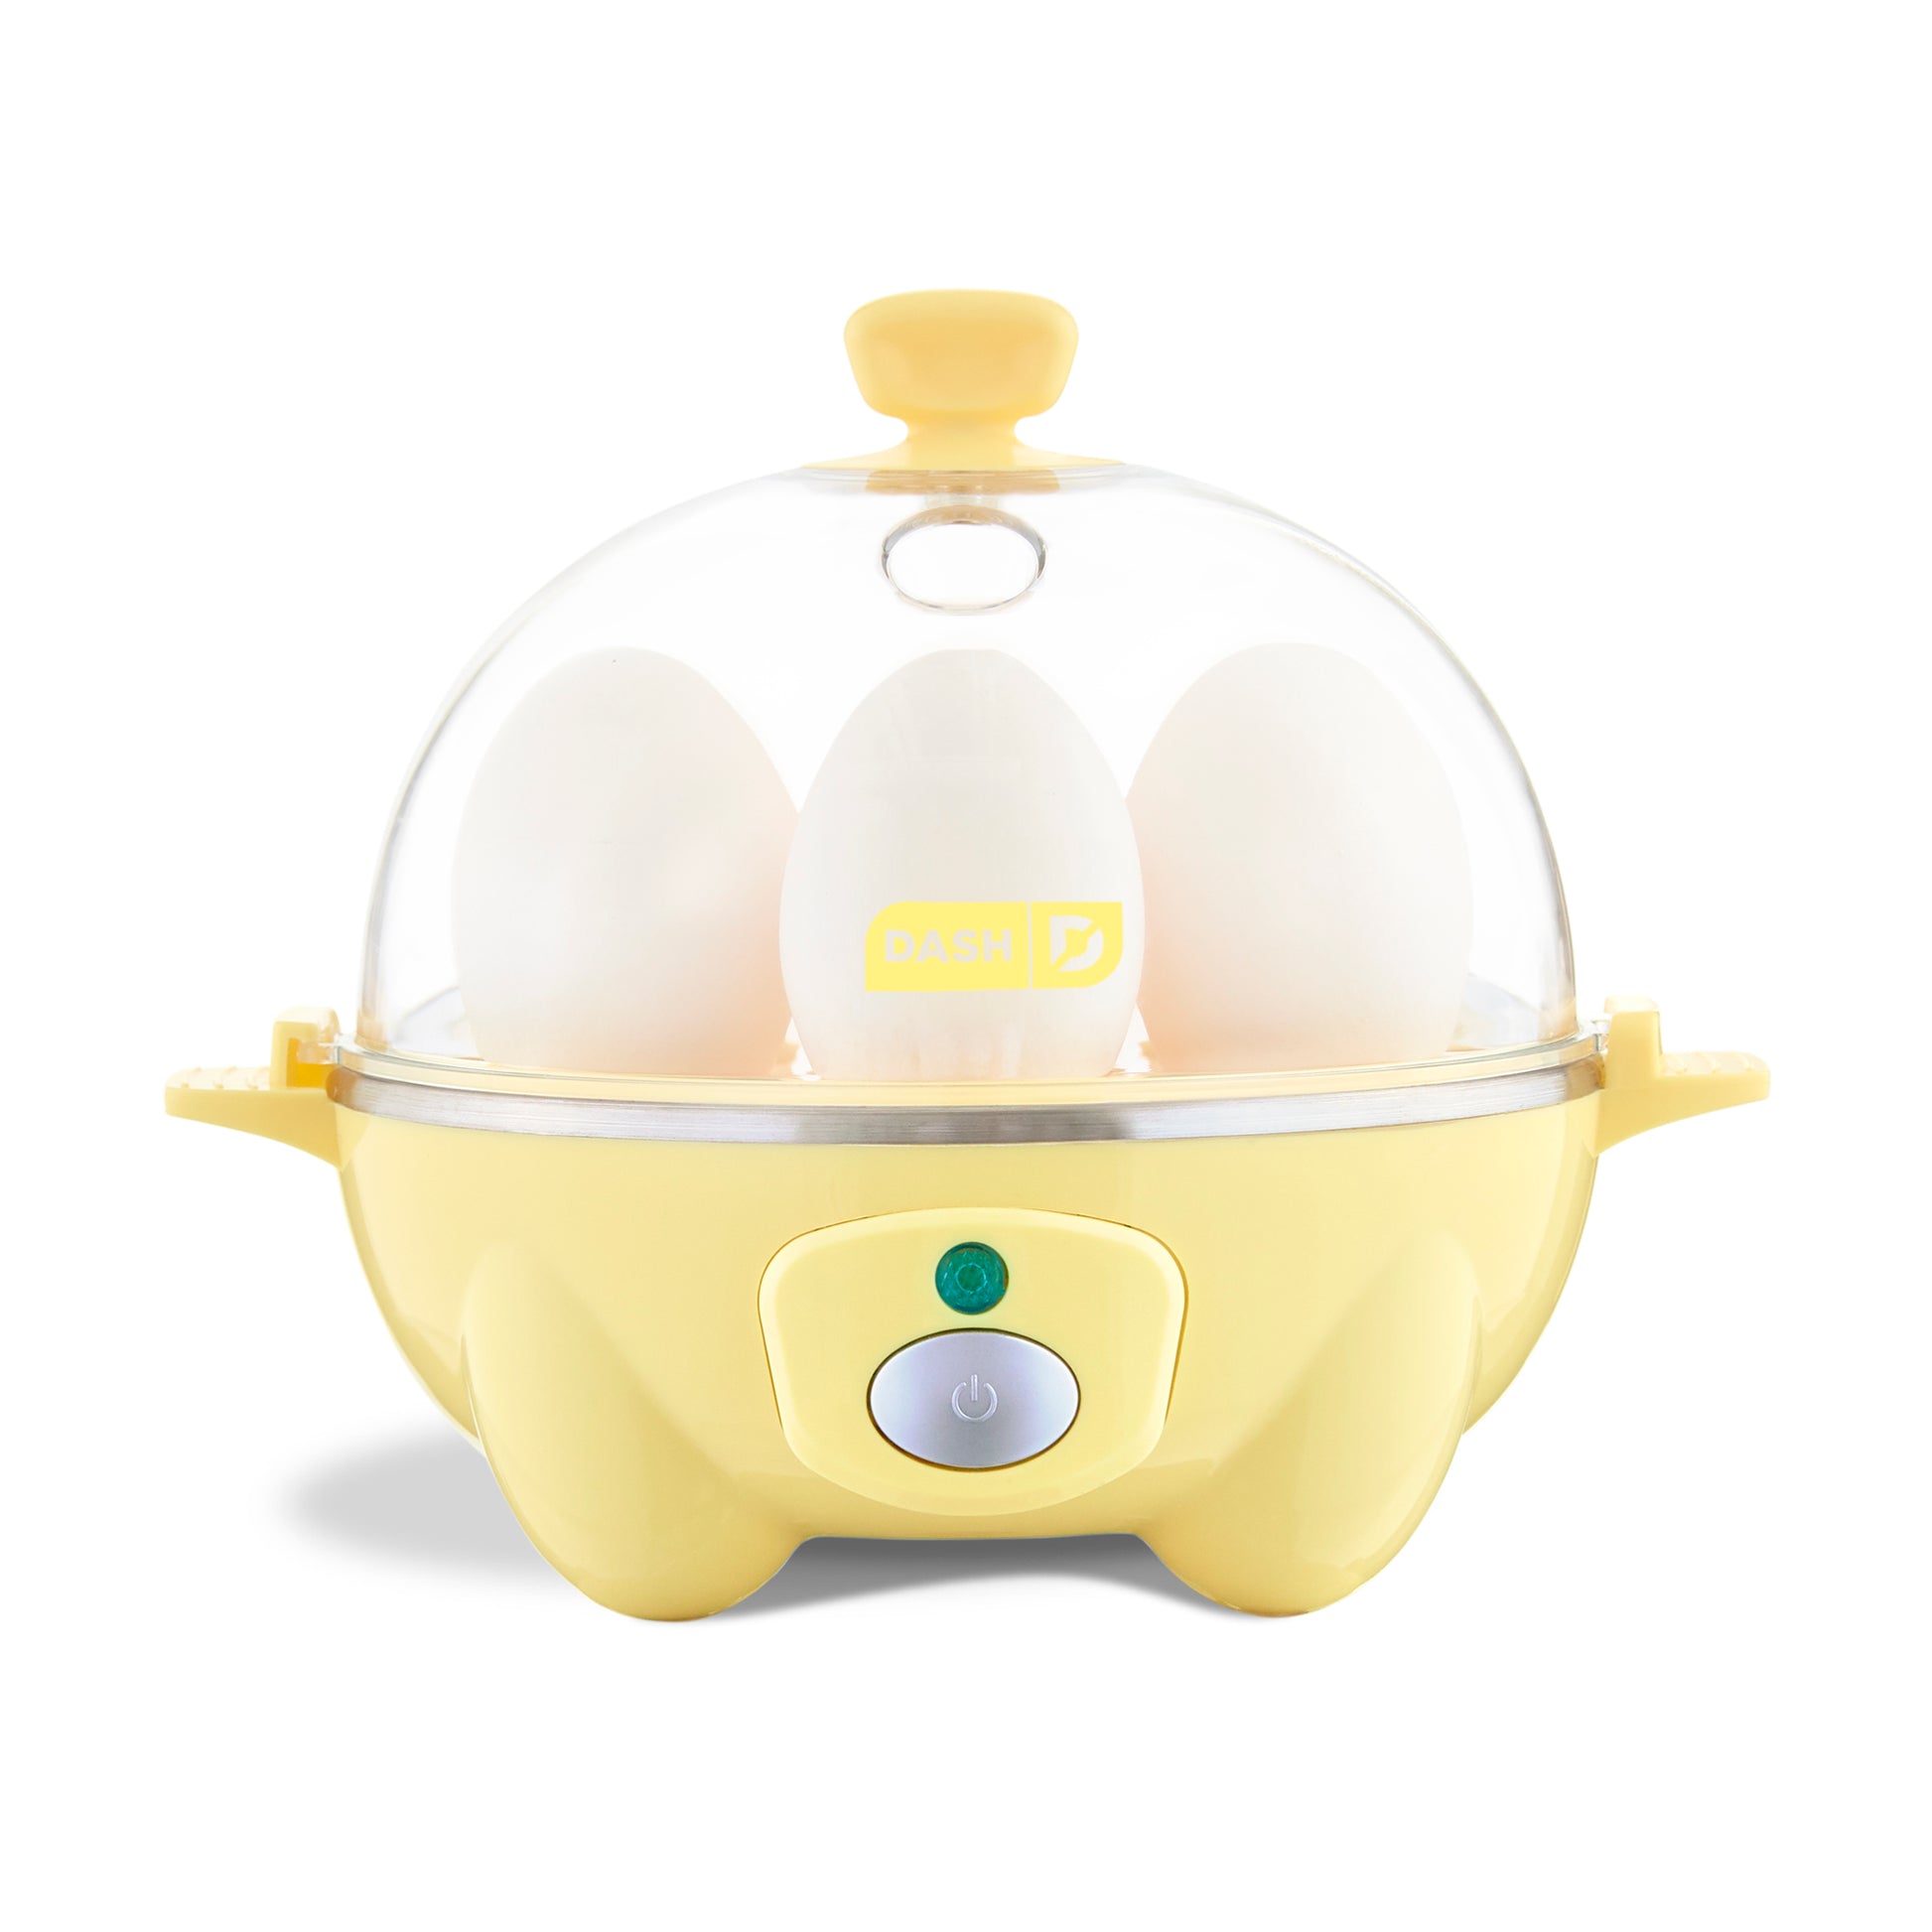 Dash Rapid Egg Cooker - Pale Yellow